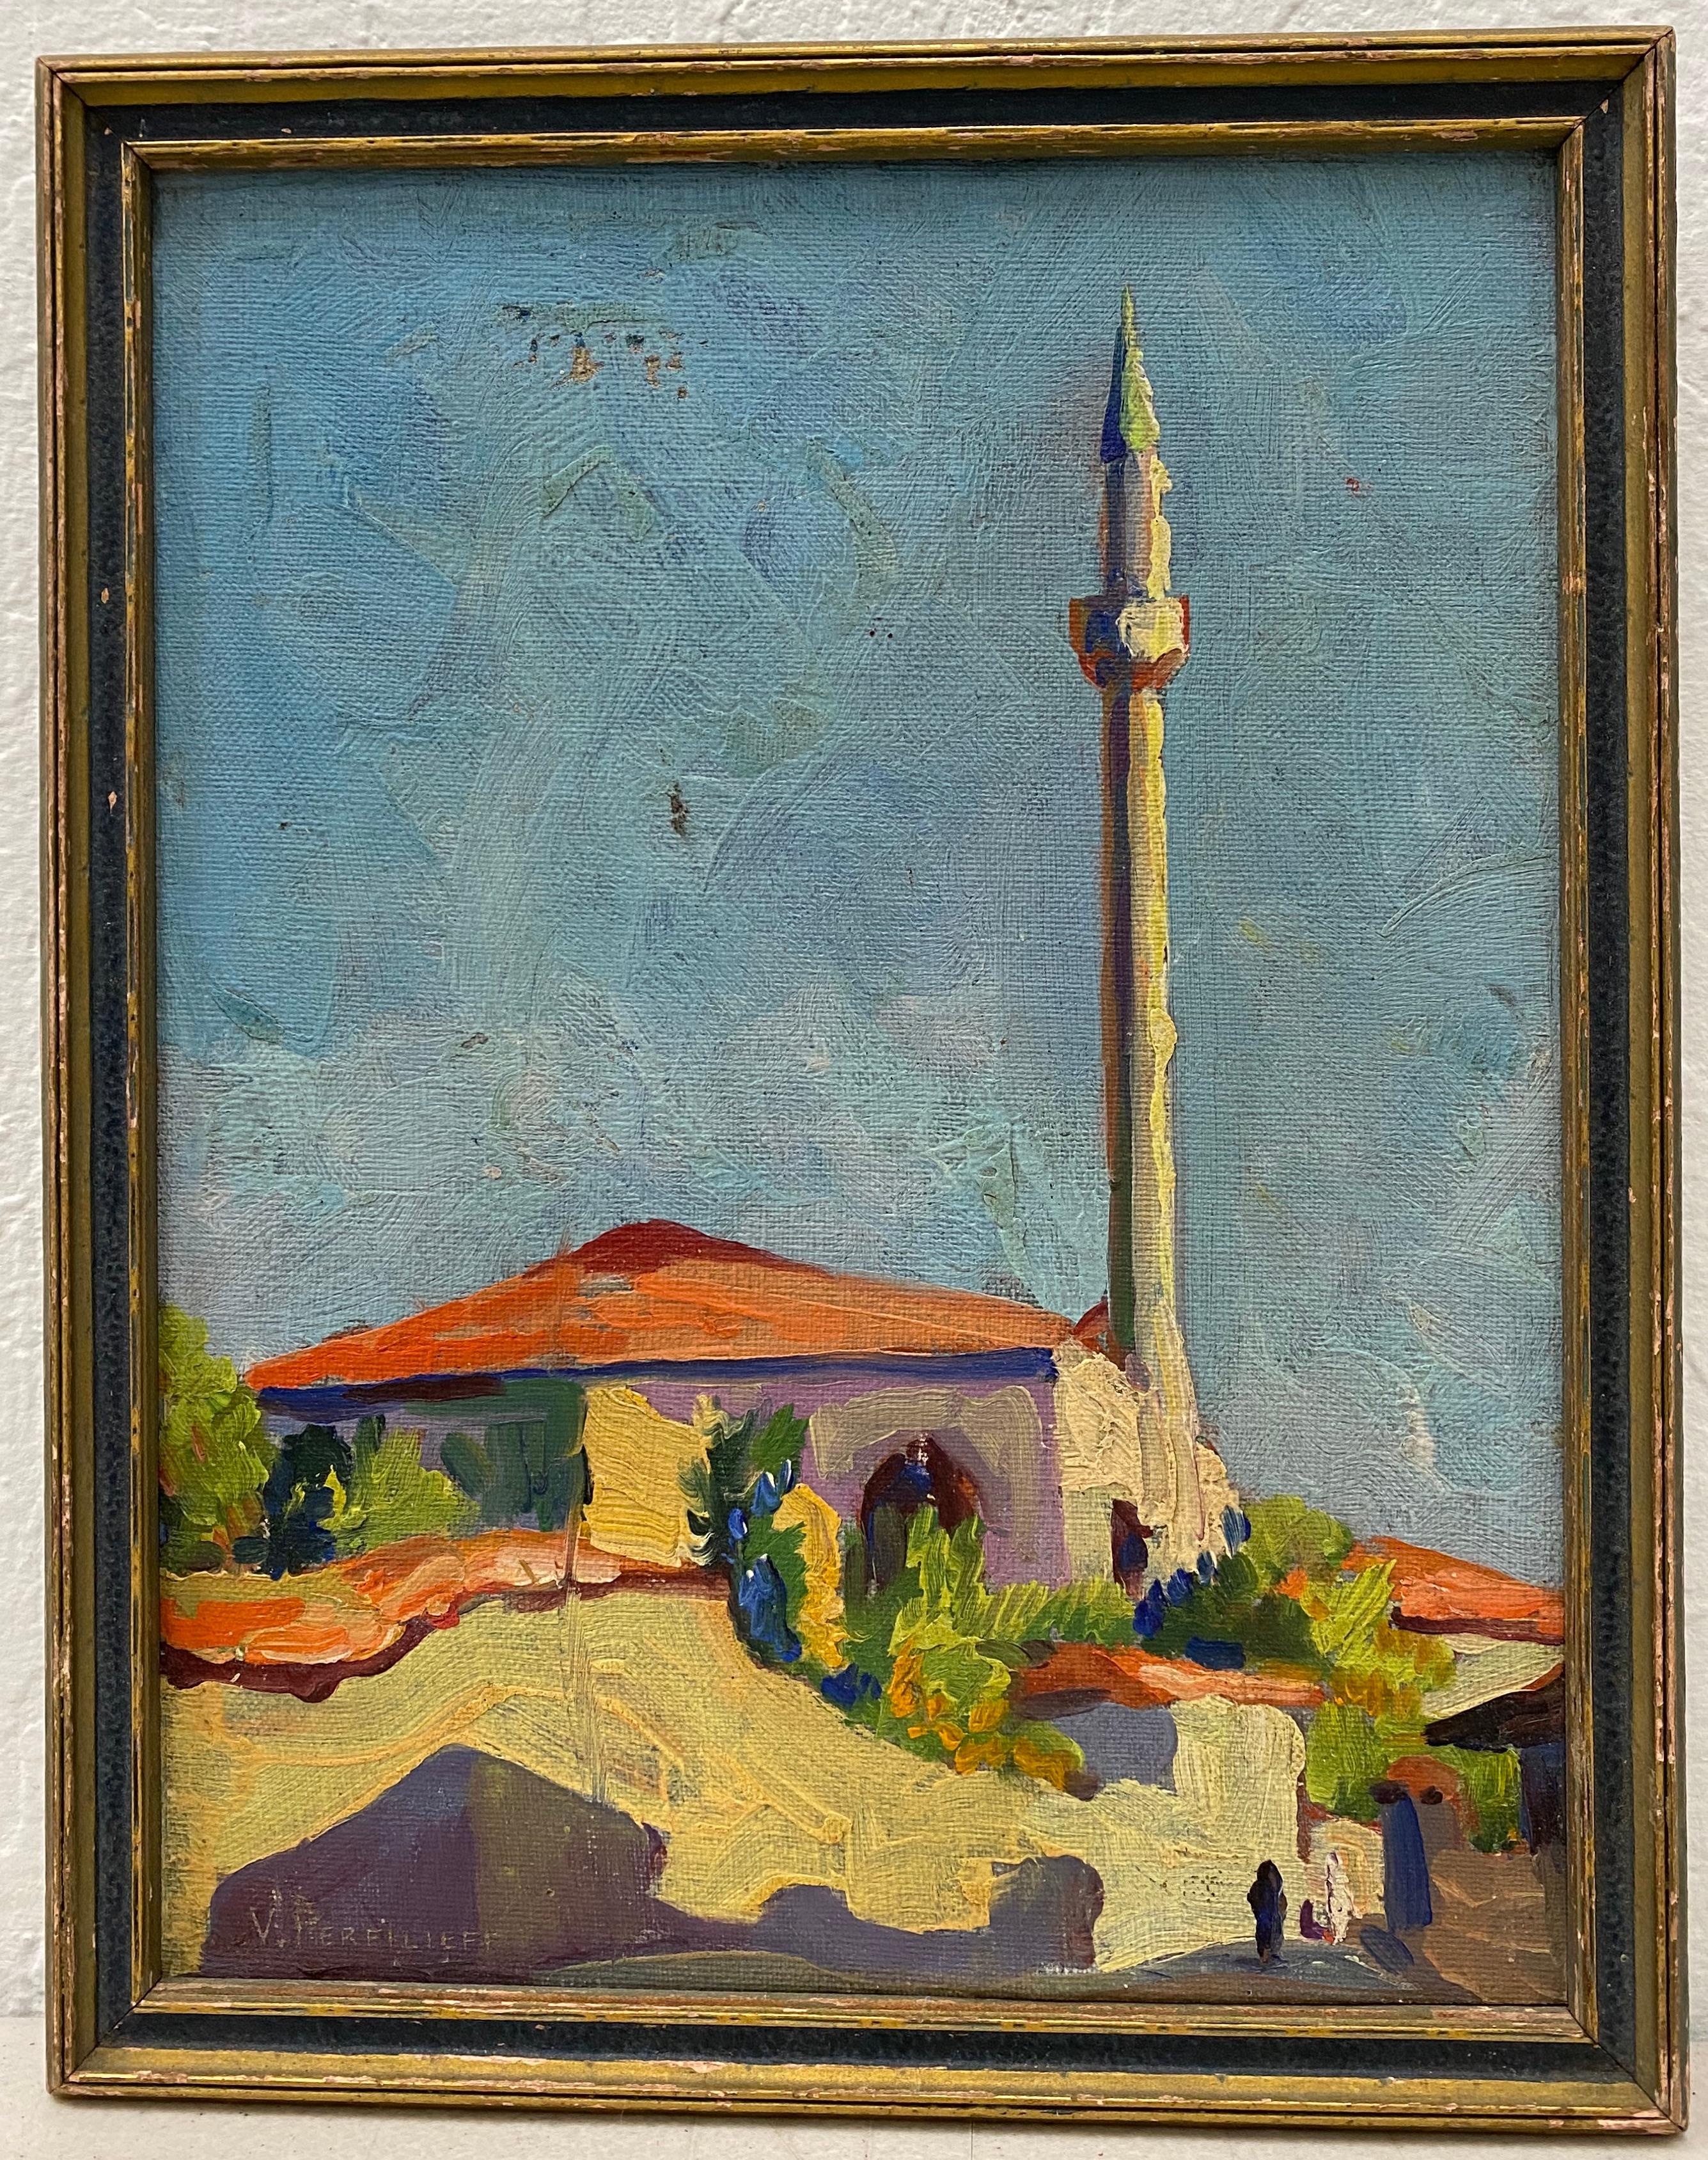 Vladimir Perfilieff "North African Architecture With Figures" Original Oil Painting C.1930

Original oil on board

Dimensions 7" wide x 9" high

The frame measures 7.75" wide x 9.75" high

Signed in the lower left corner

The painting is in good